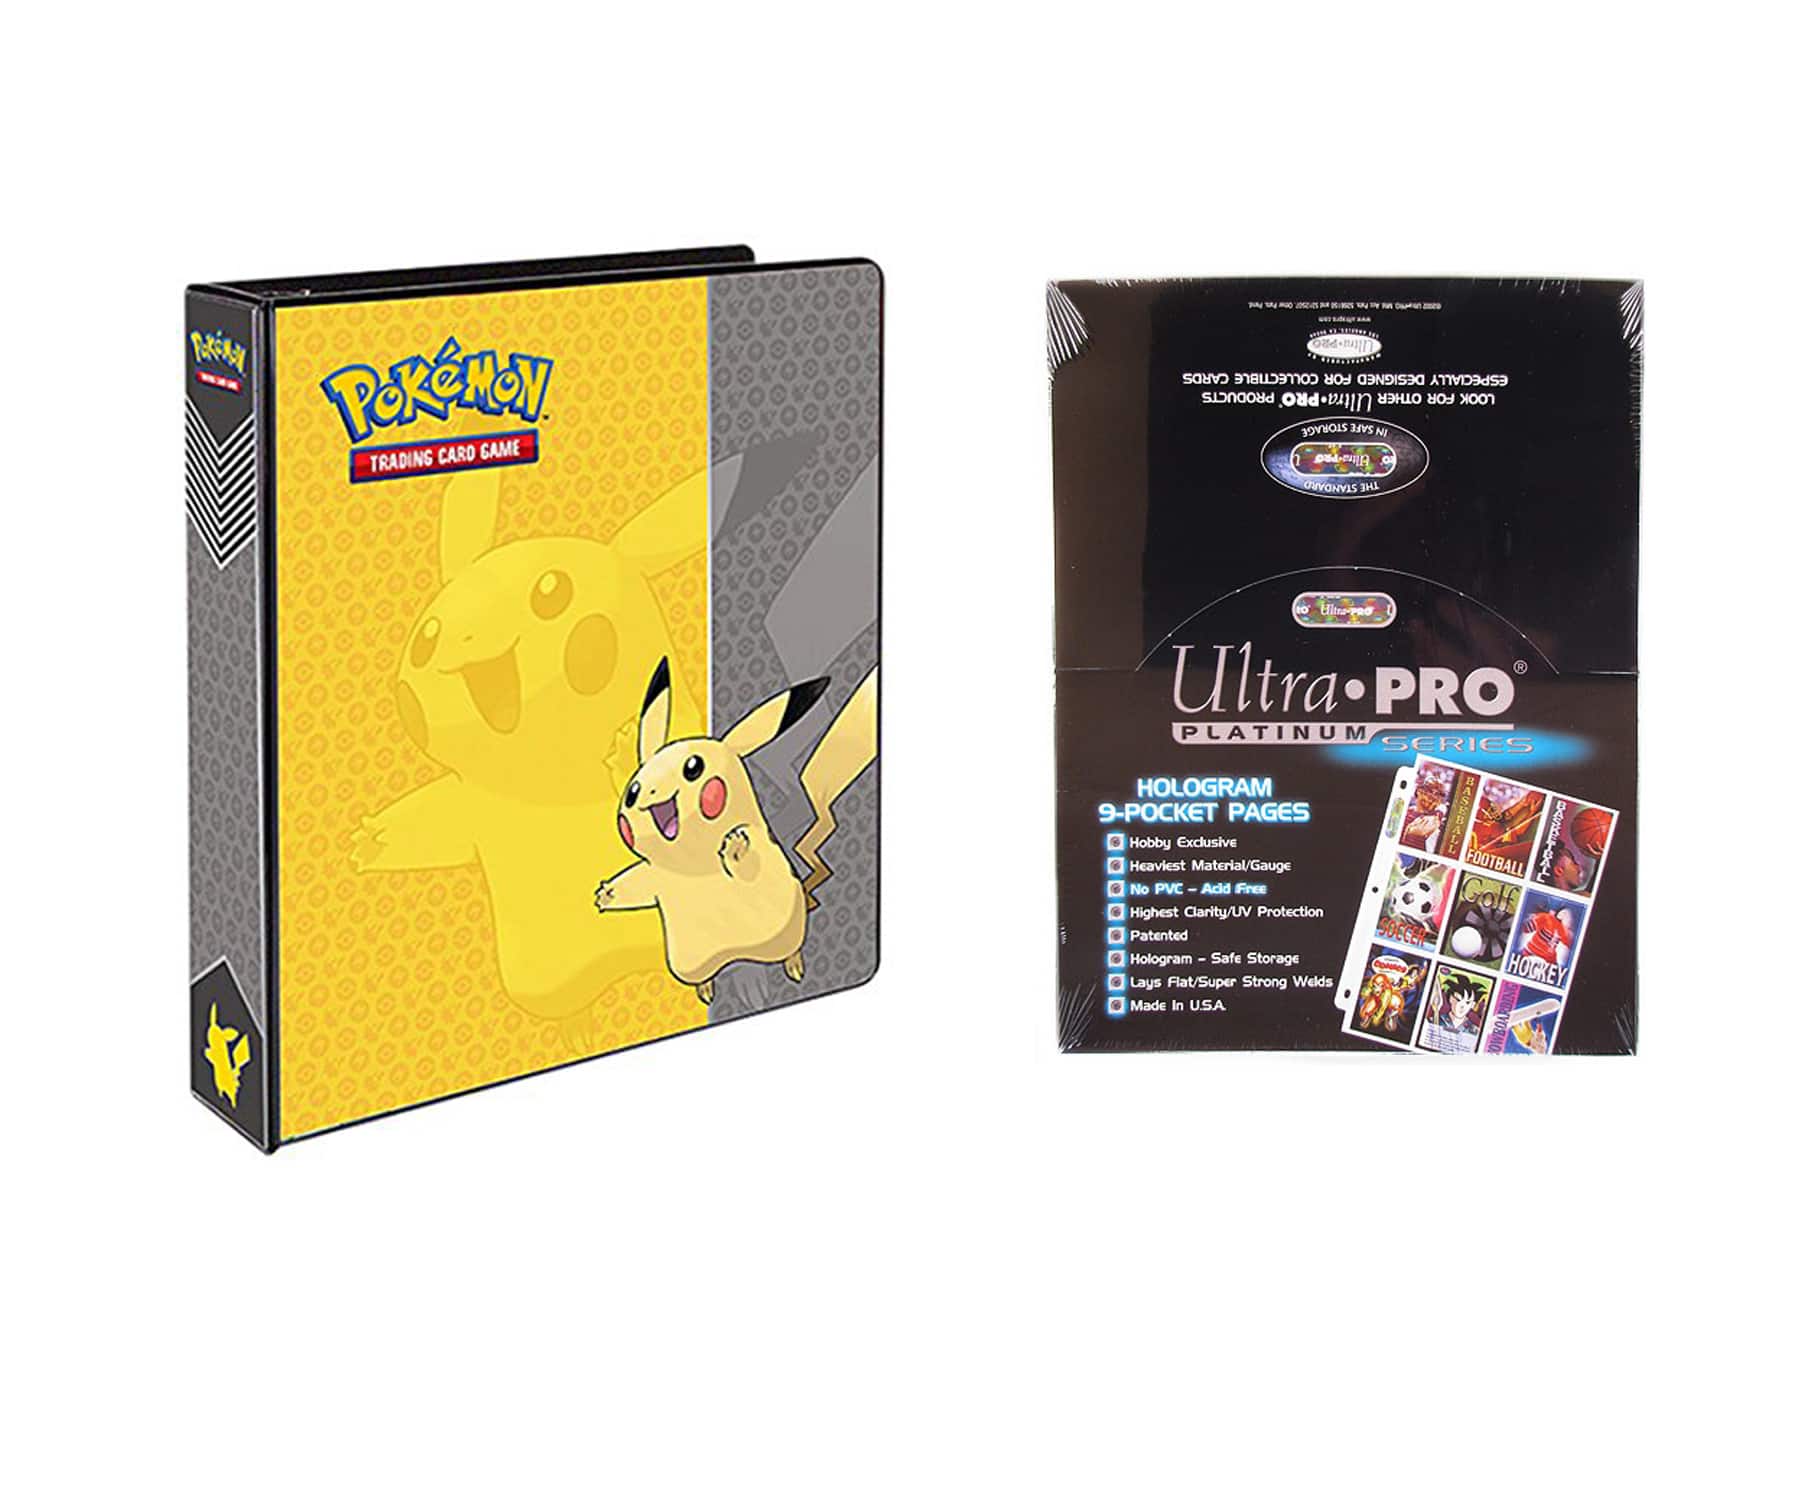 Pokemon Pikachu 2 Inches 3-Ring Binder Card Album with 100 Ultra Pro Platinum 9-Pocket Sheets